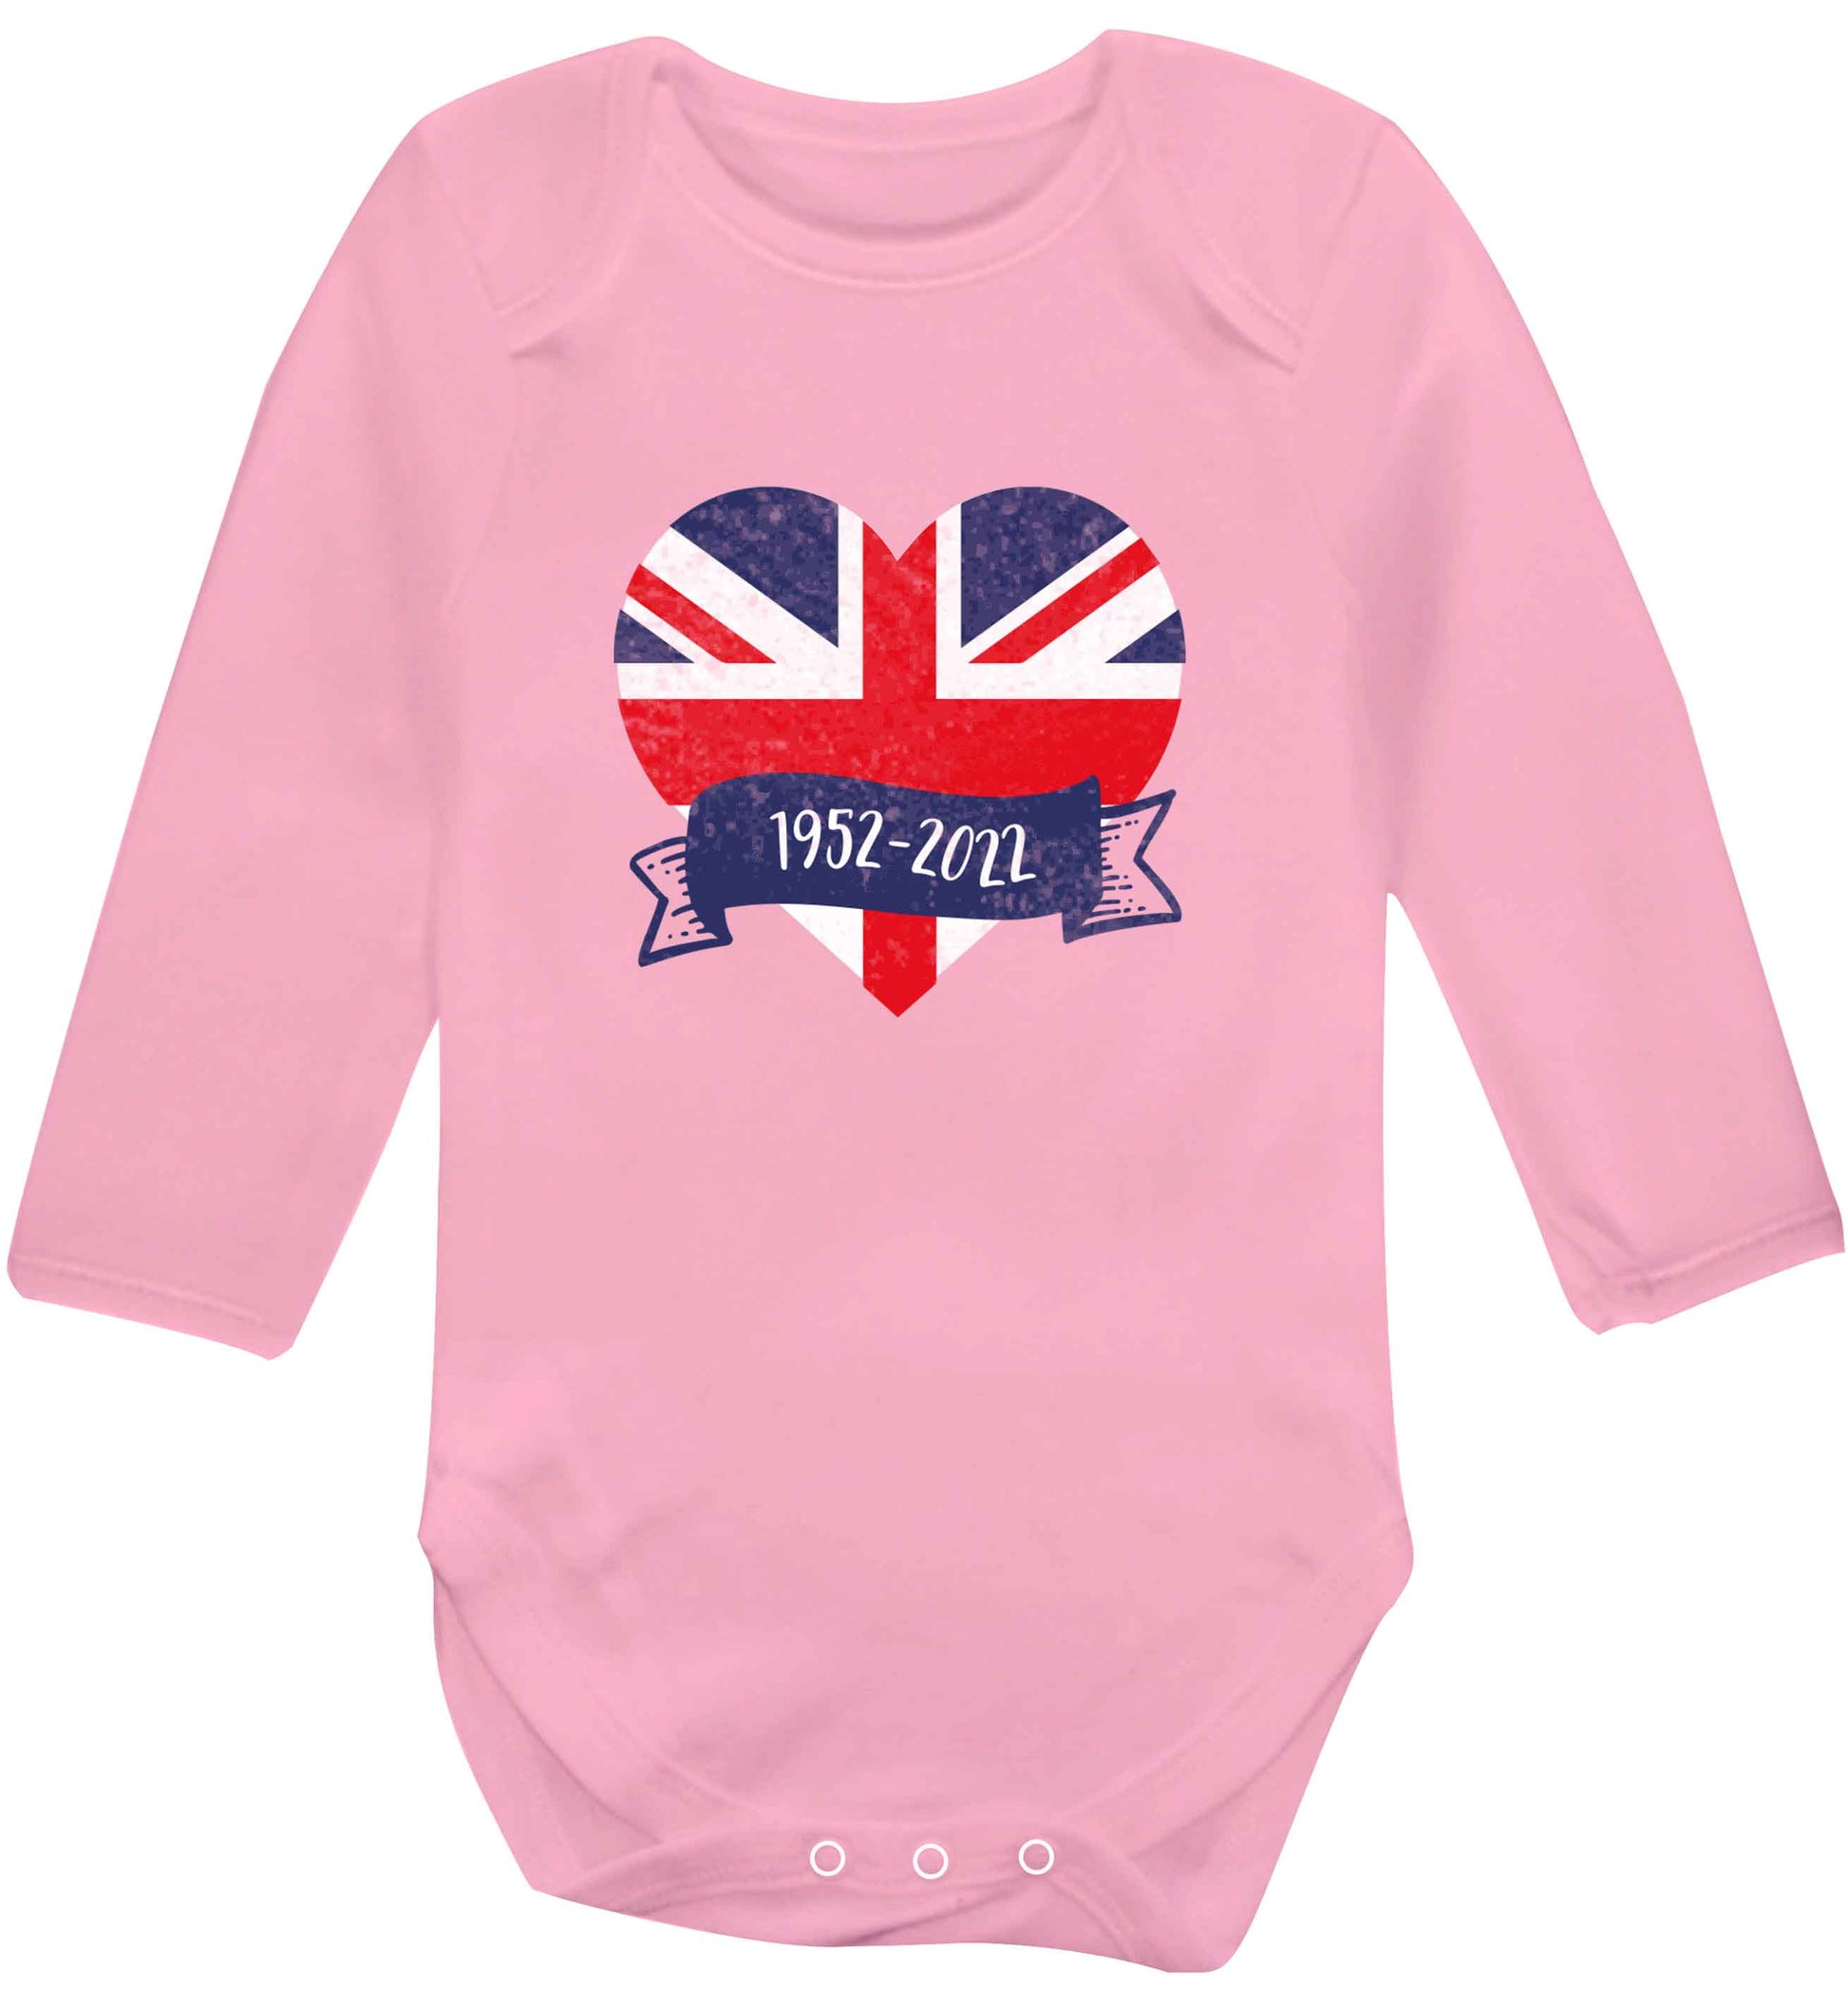 British flag heart Queens jubilee baby vest long sleeved pale pink 6-12 months